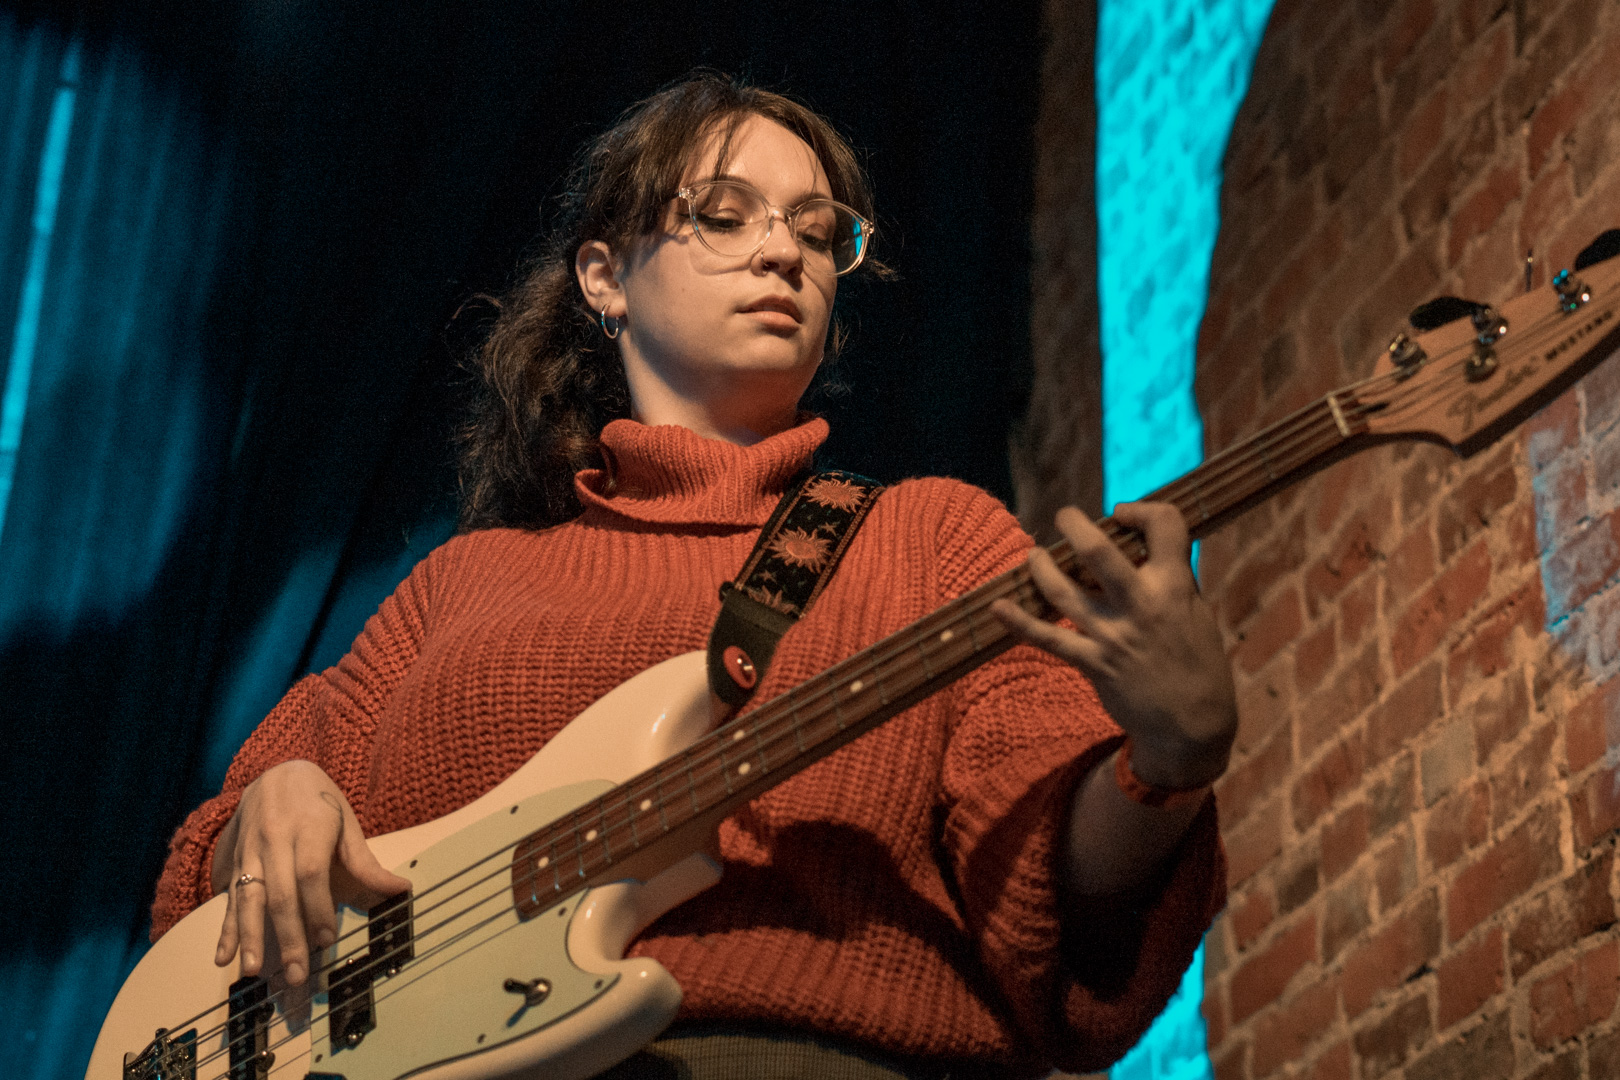 A young woman plays bass